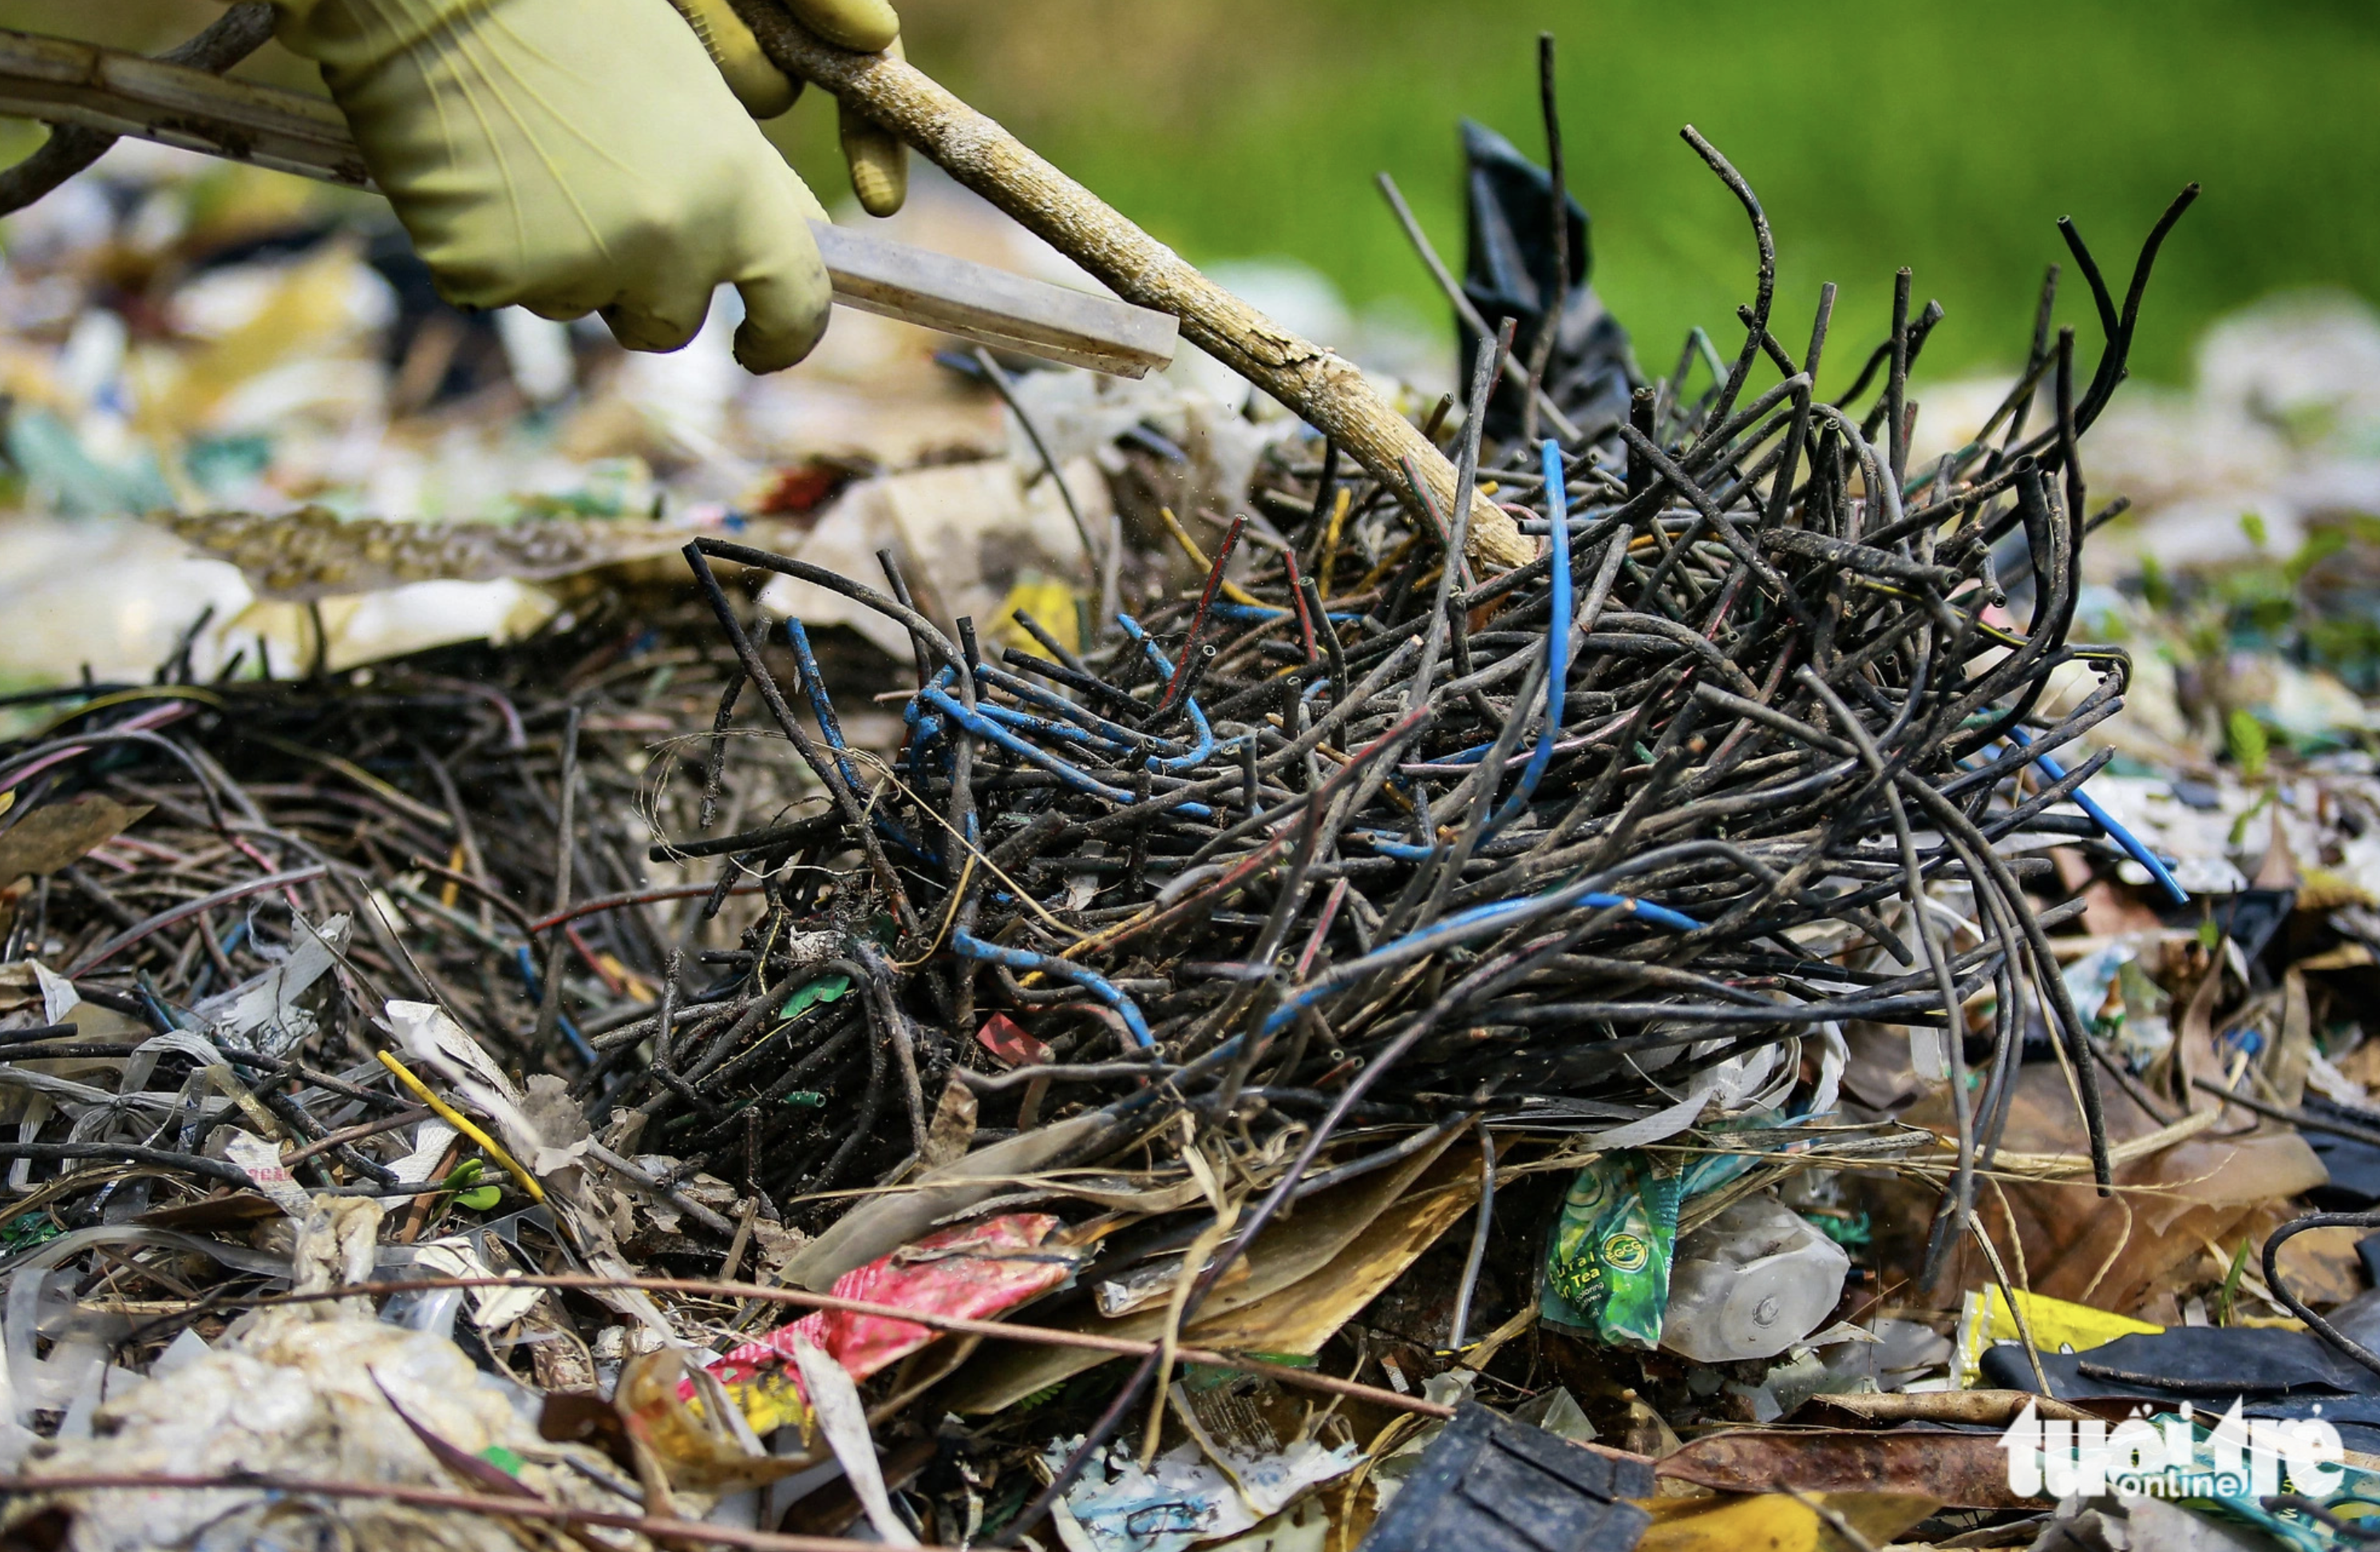 An illegal dumpsite contains batteries, used electric wires, and bulbs. Photo: Ngoc Khai / Tuoi Tre